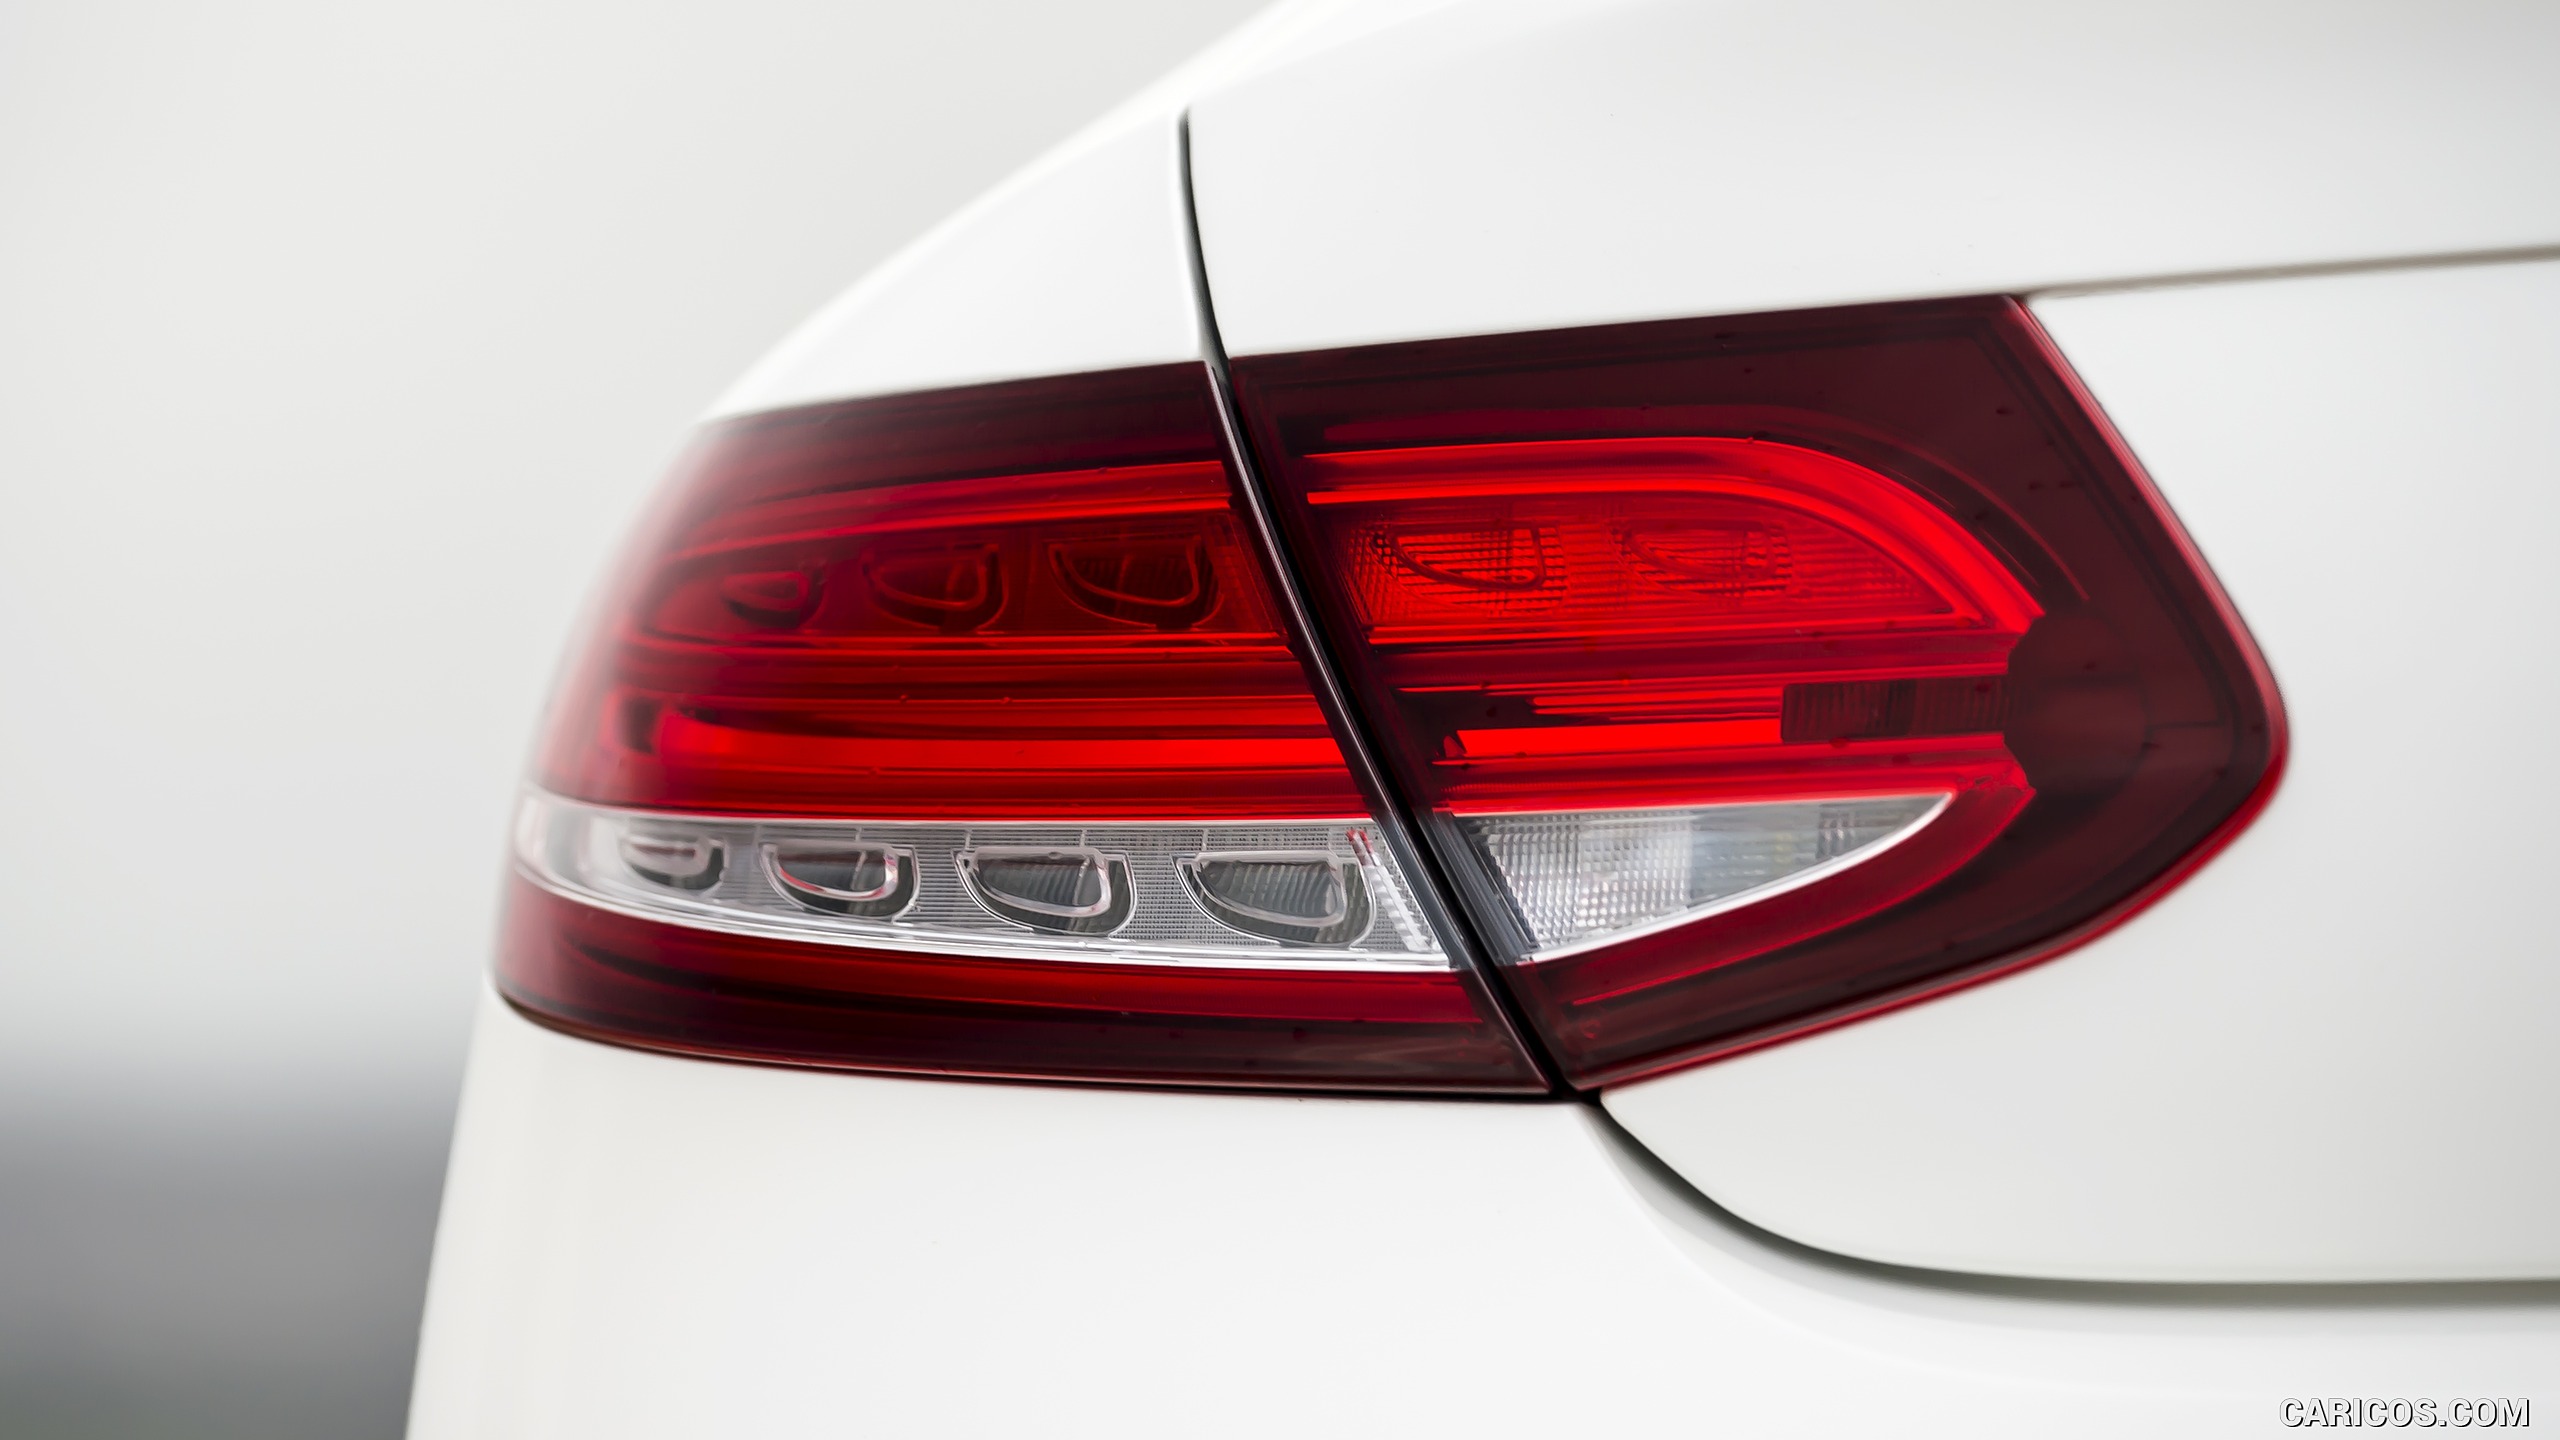 2017 Mercedes-Benz C-Class Coupe (UK-Spec) - Tail Light, #148 of 210